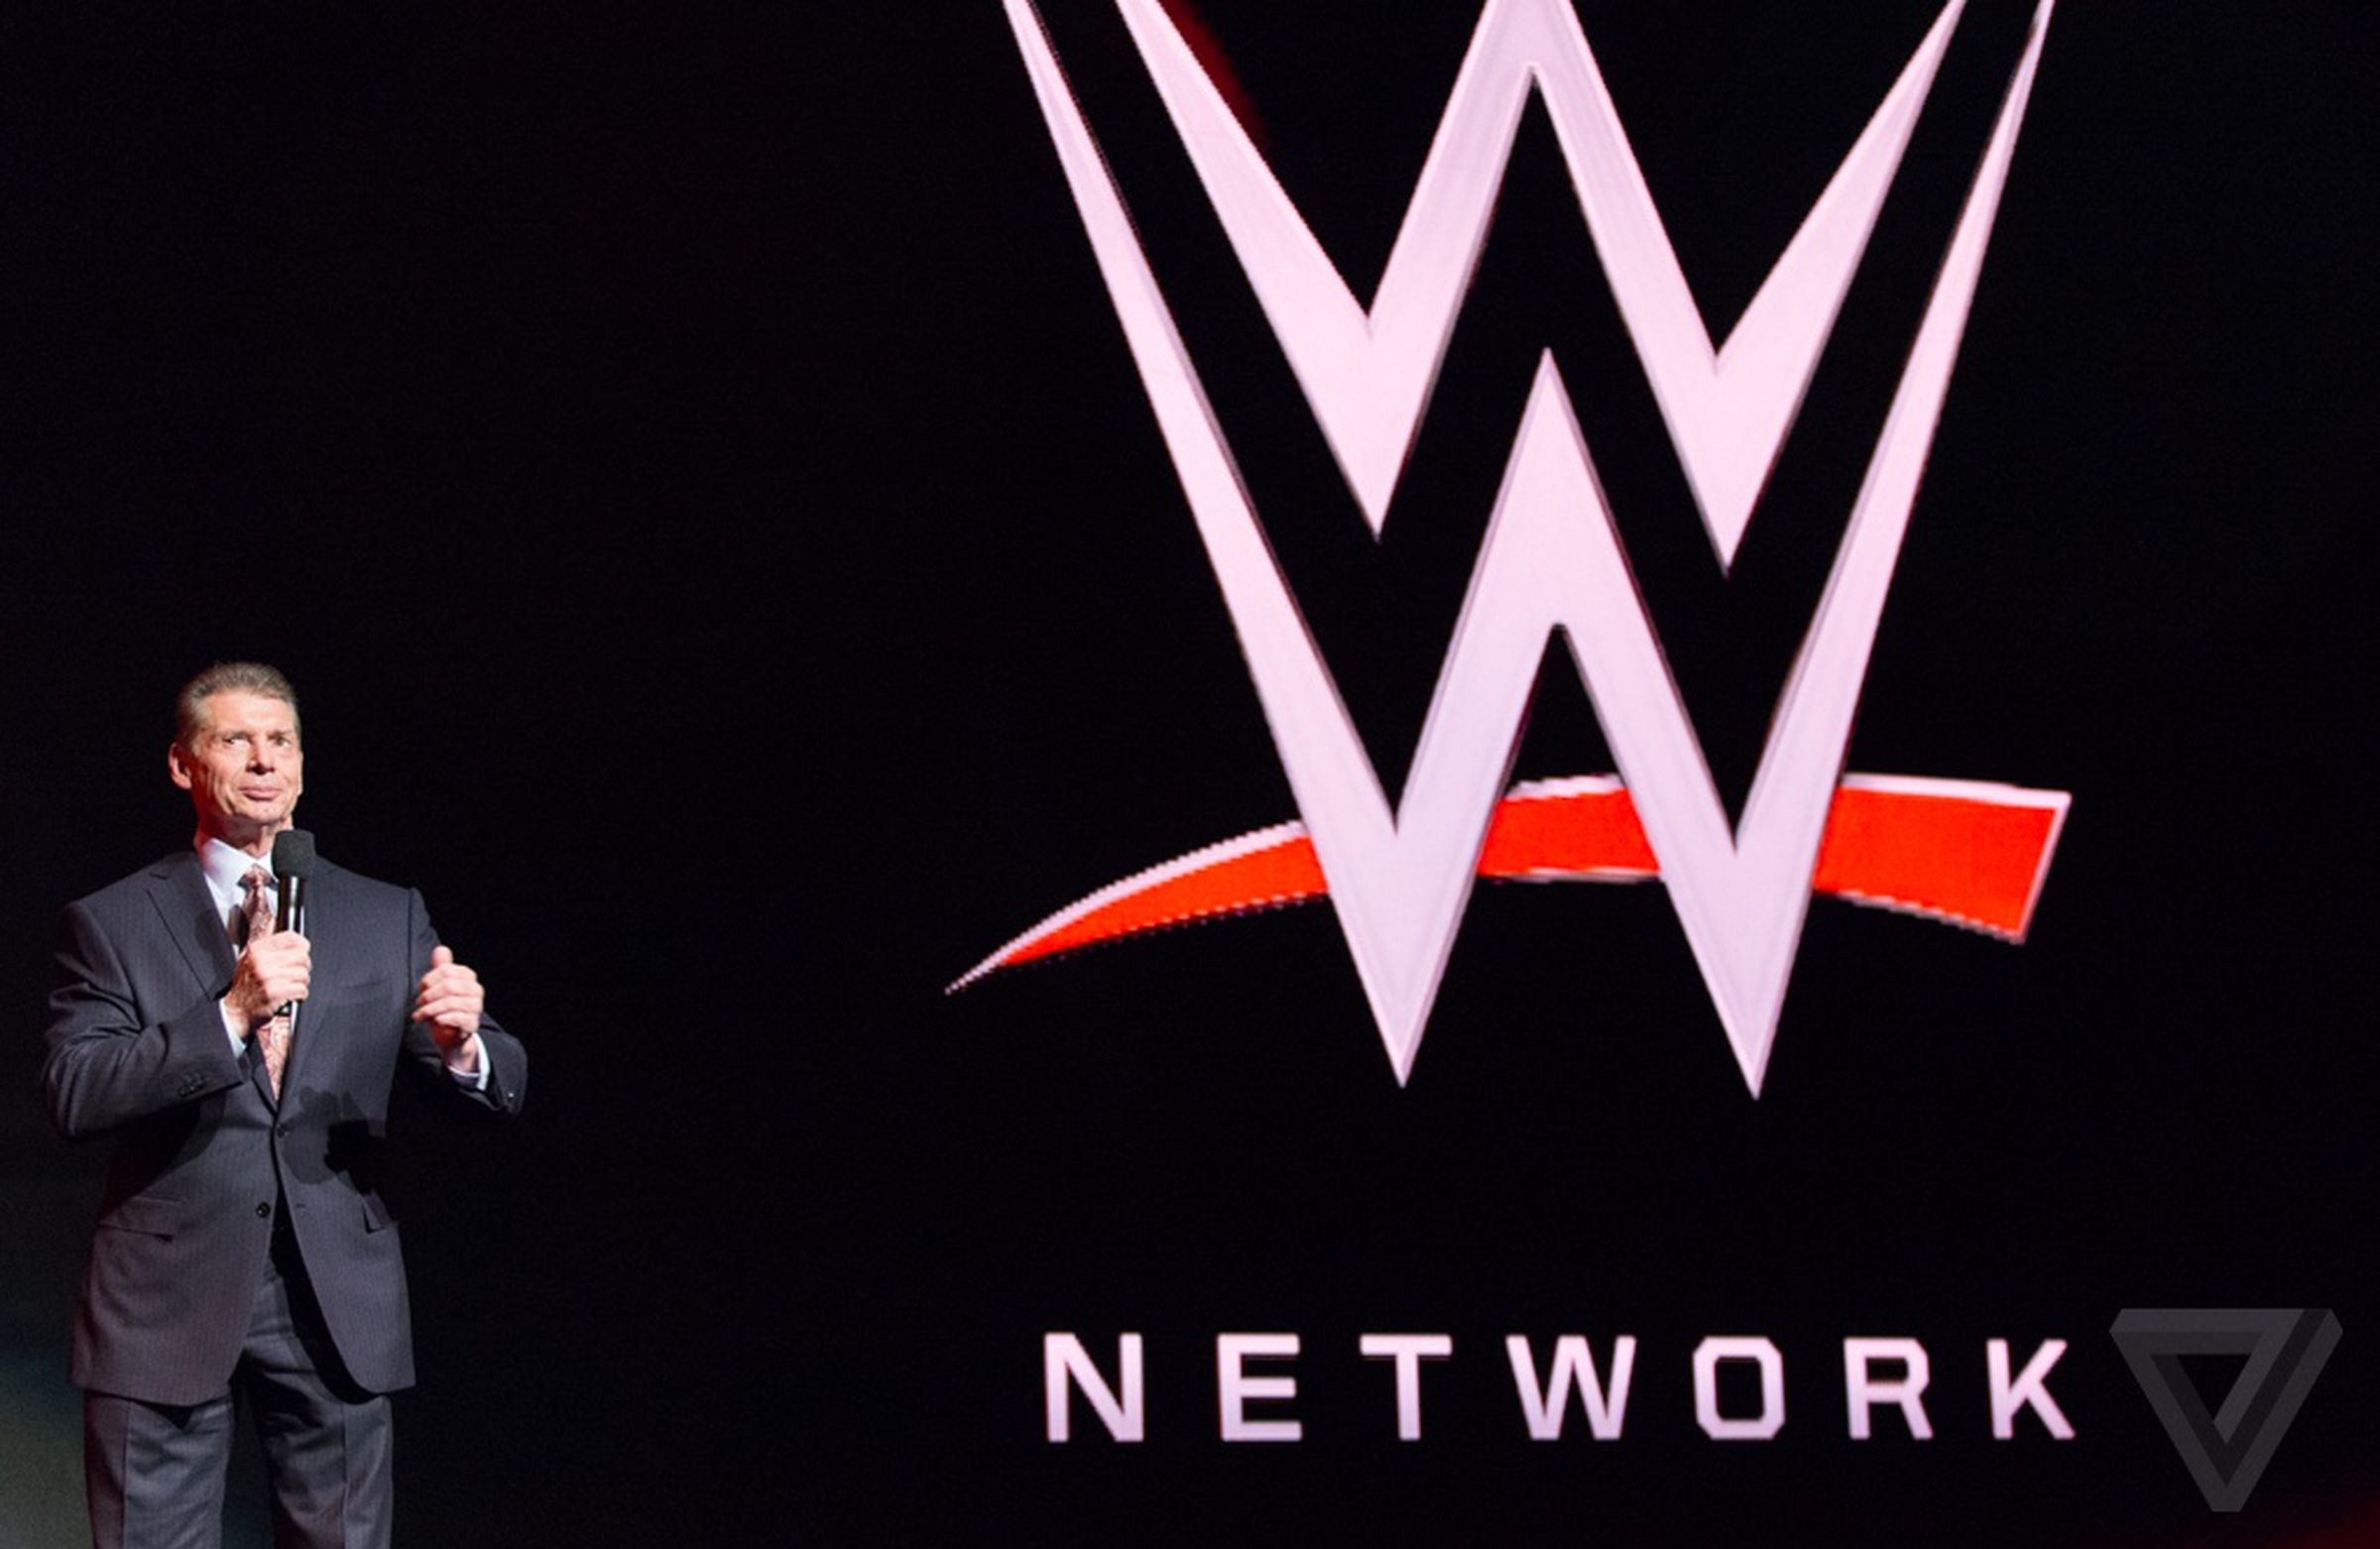 WWE chairman and CEO Vince McMahon announced WWE Network at CES 2014.